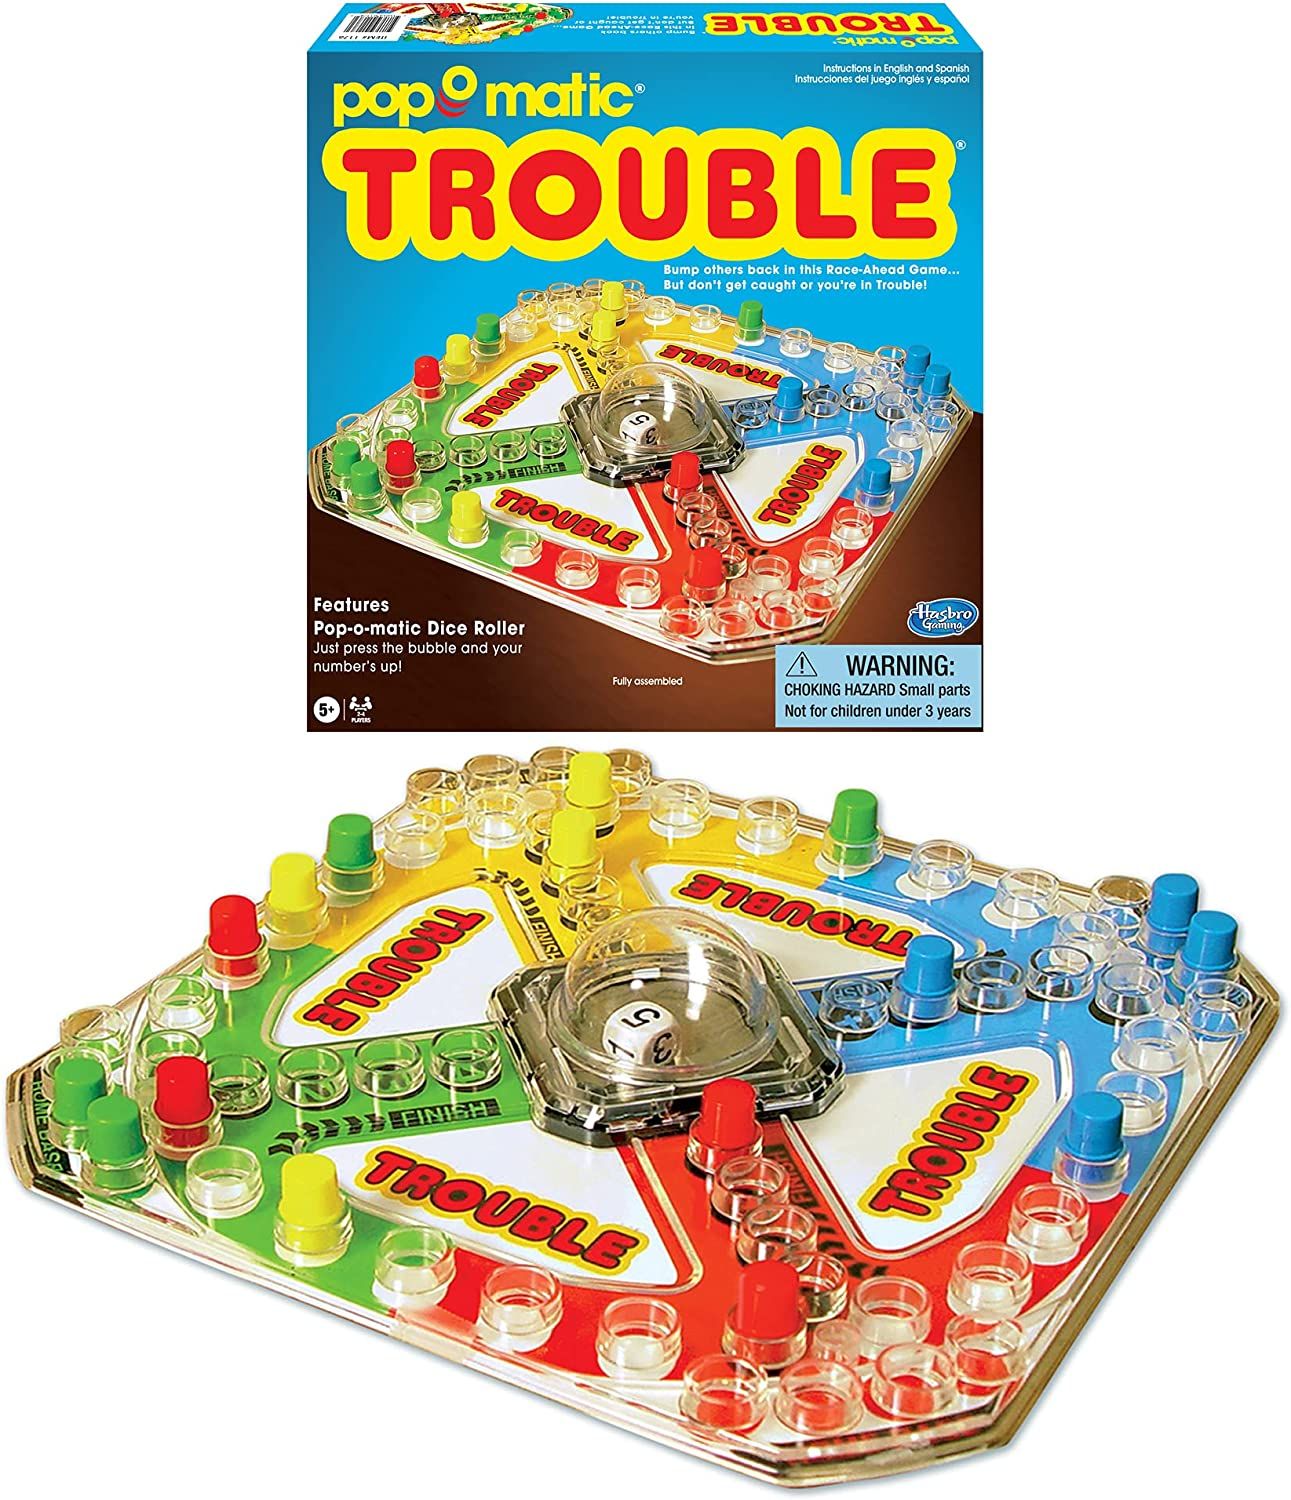 Trouble is one of the best legacy board games